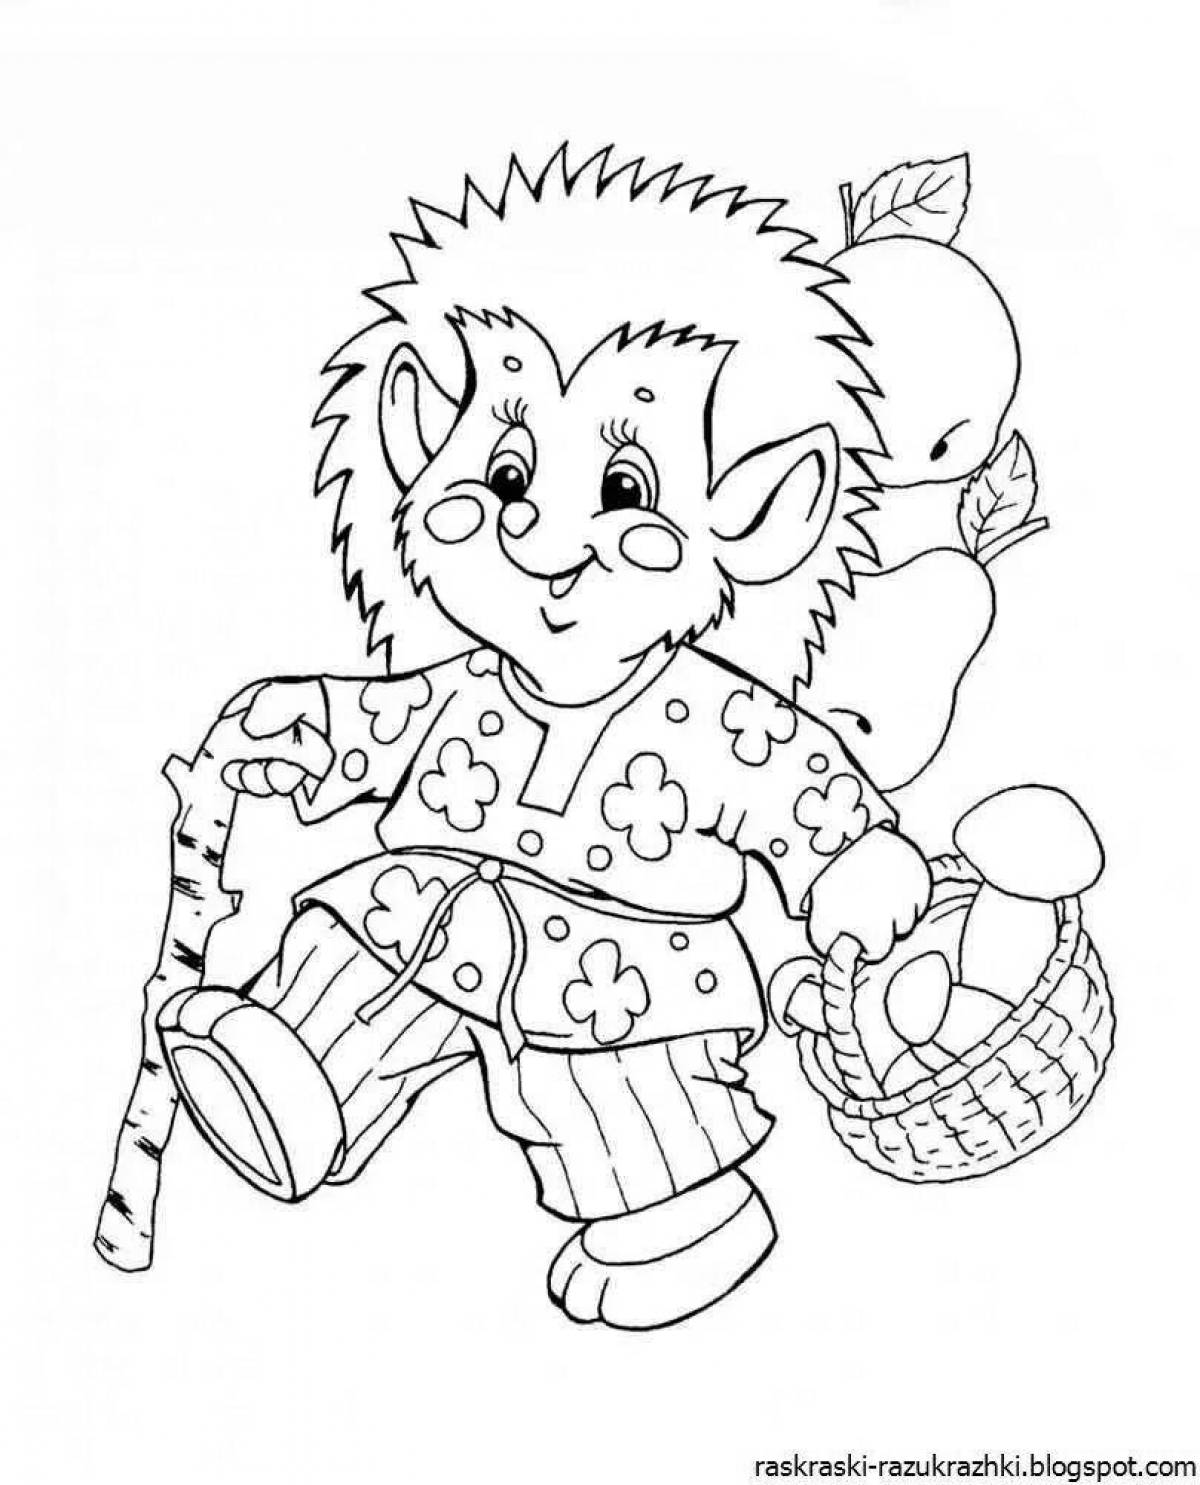 Famous coloring pages heroes of Russian folk tales